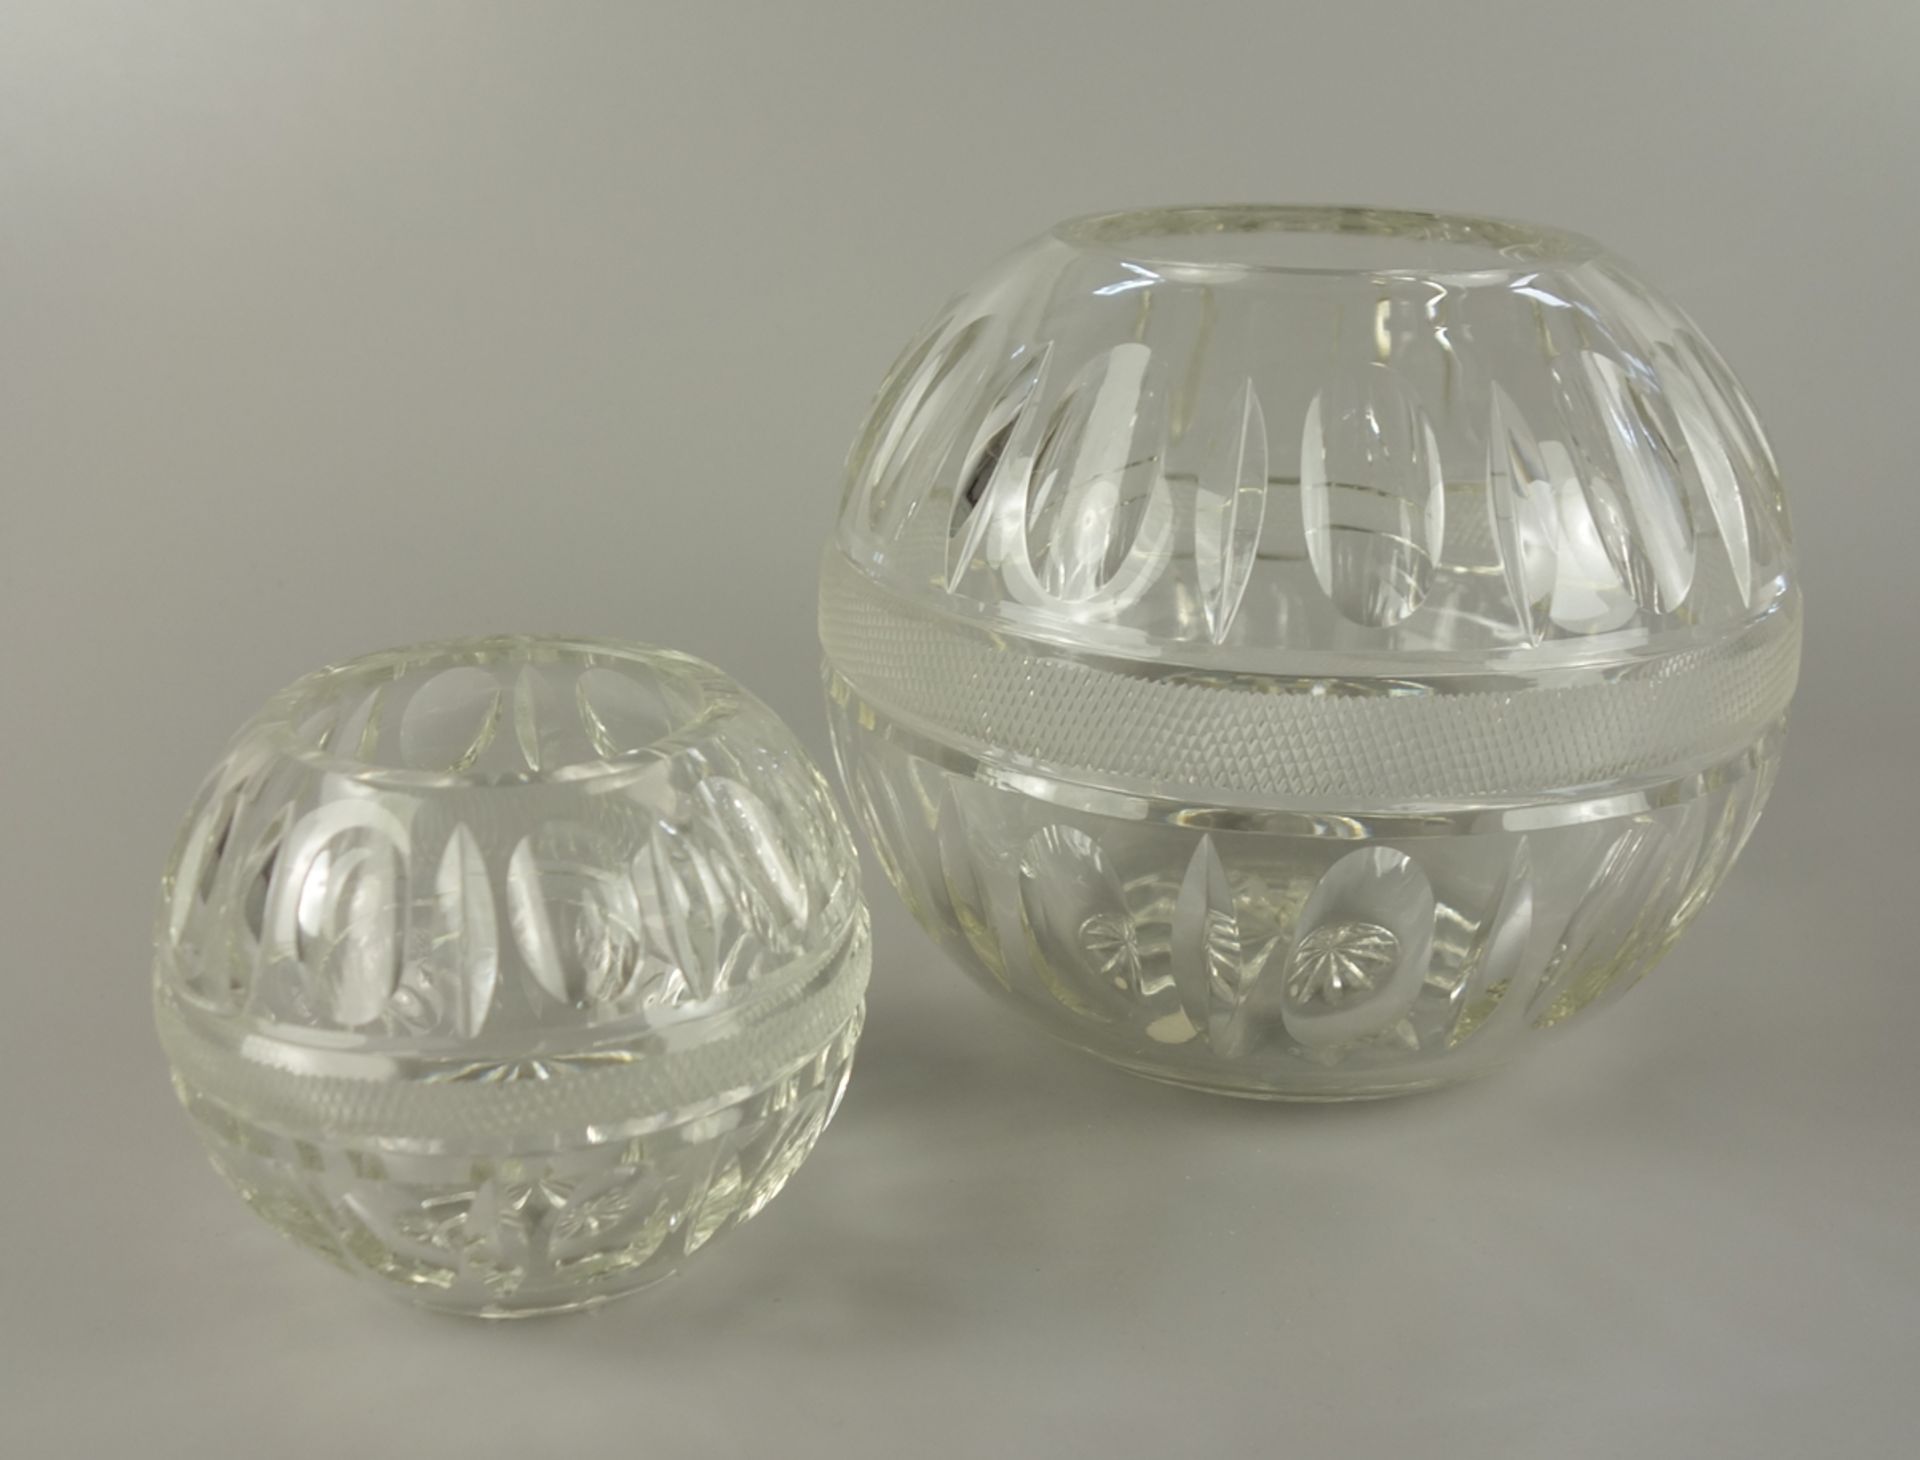 Bowl and pair of spherical vases, crystal, 2nd half 20th cent. - Image 2 of 2